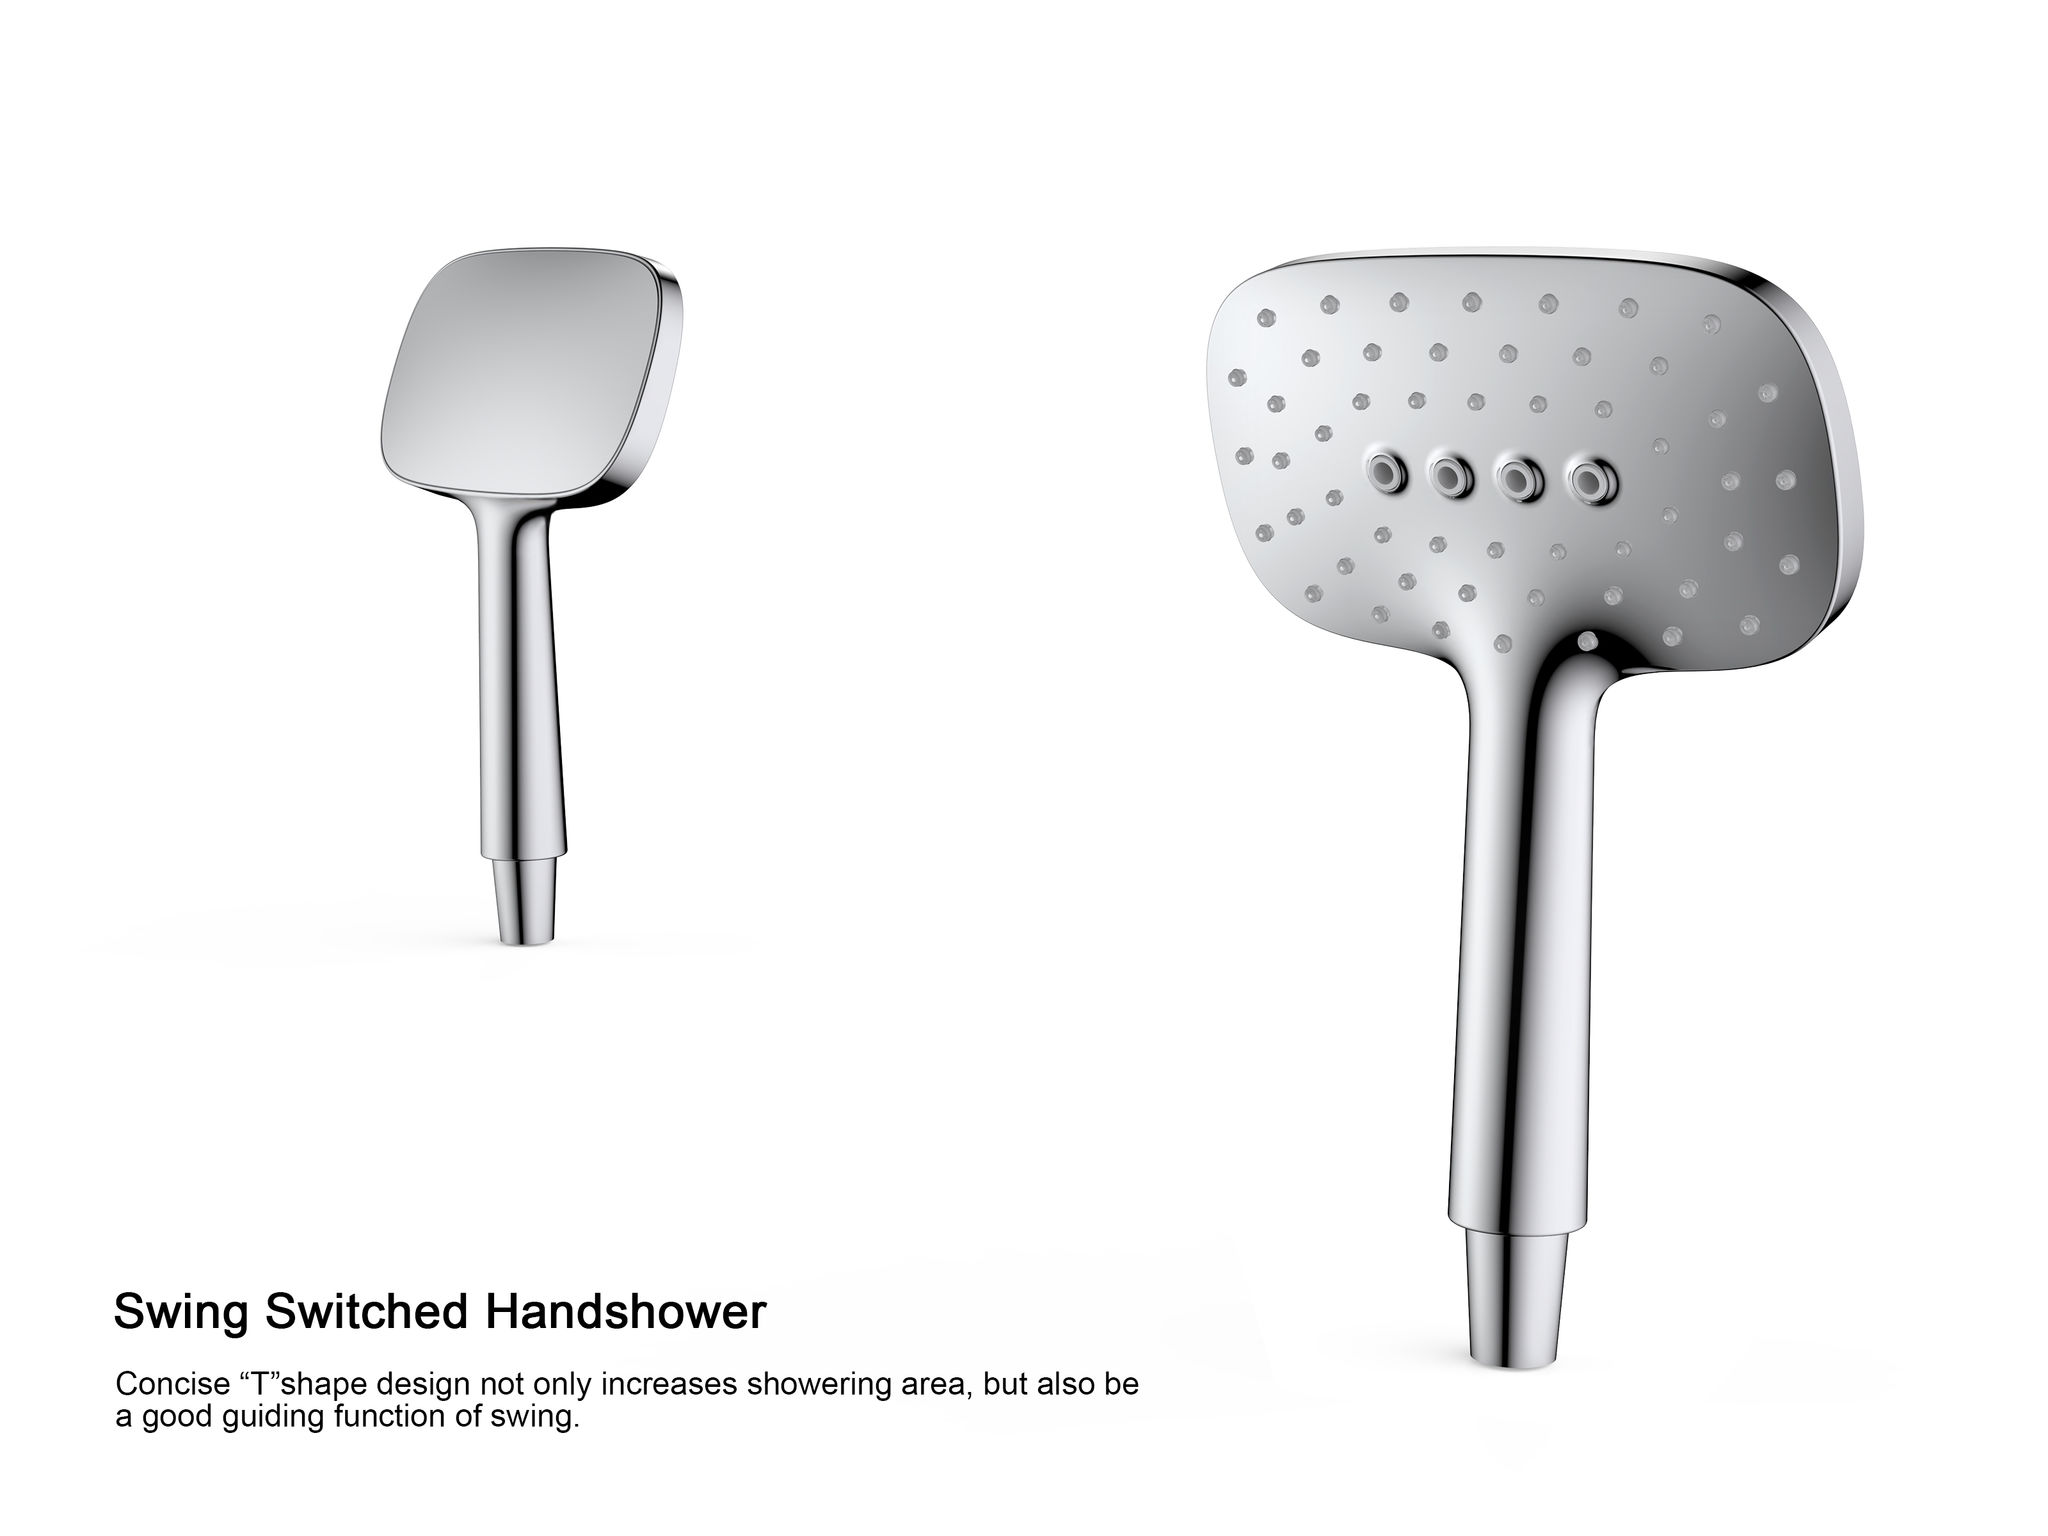 Swing Switched Handshower